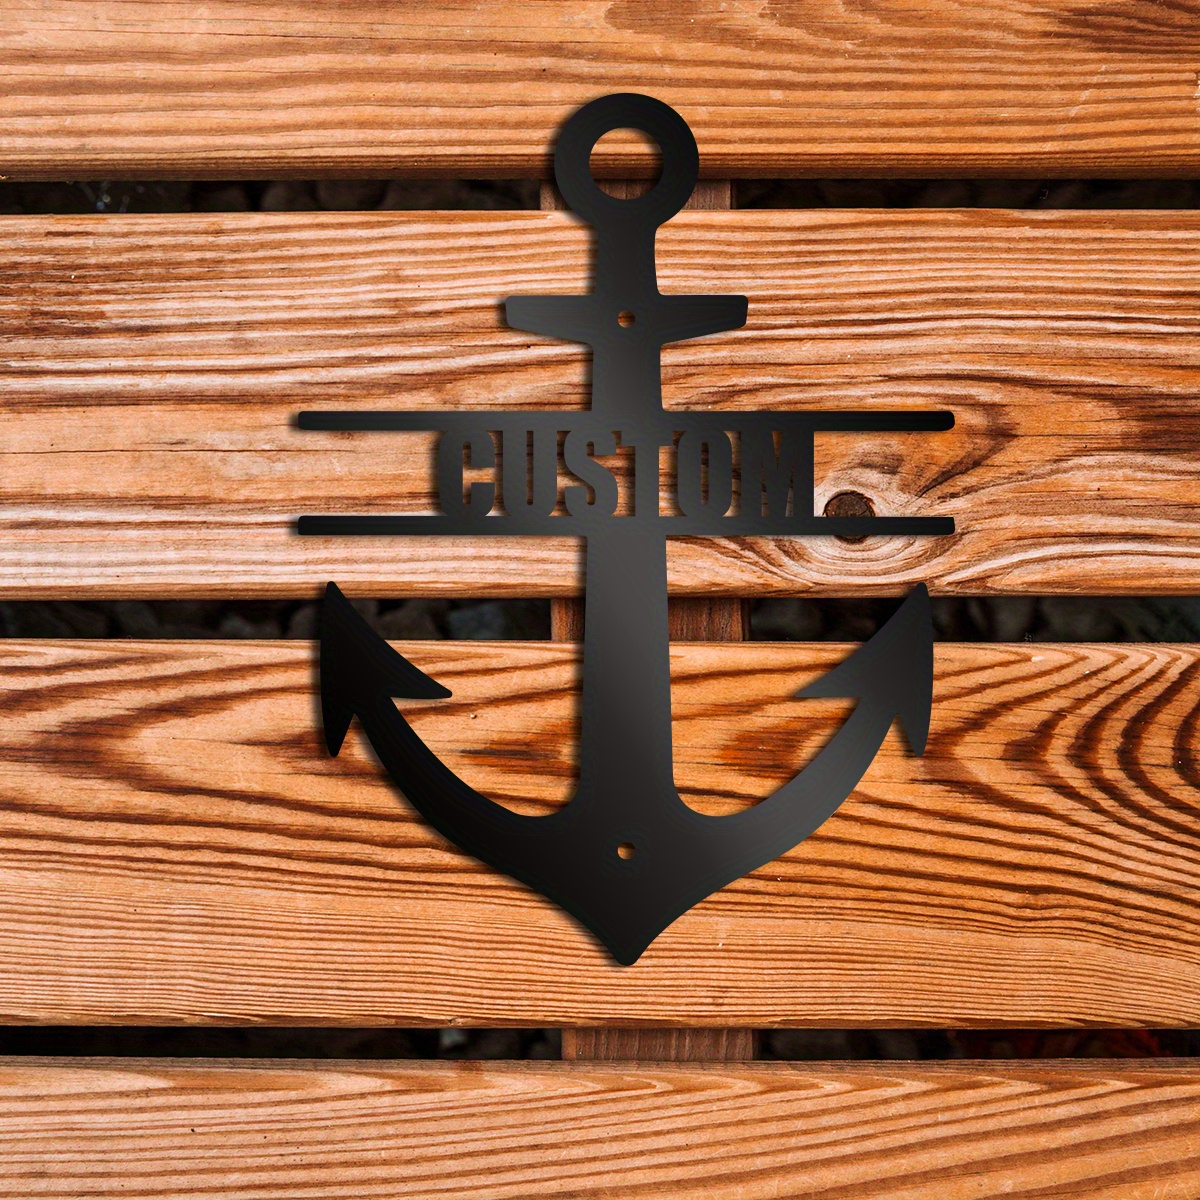 

1pc Custom Metal Anchor Wall Art, Personalized Nautical Name Sign, Decorative Anchor Room Accents, Outdoor & Indoor Metal Decor, Housewarming Gift